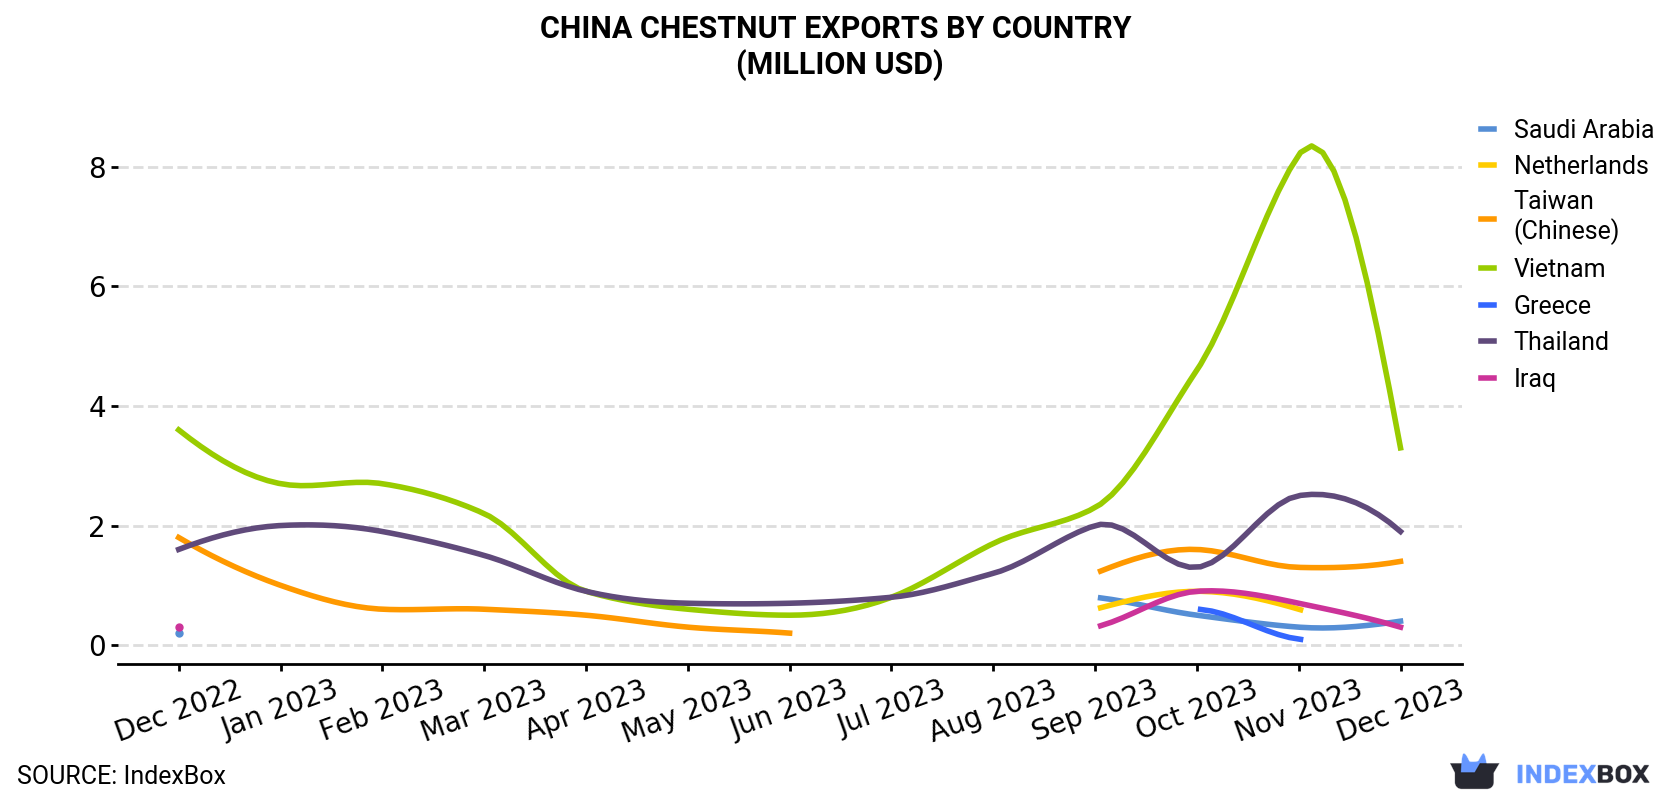 China Chestnut Exports By Country (Million USD)